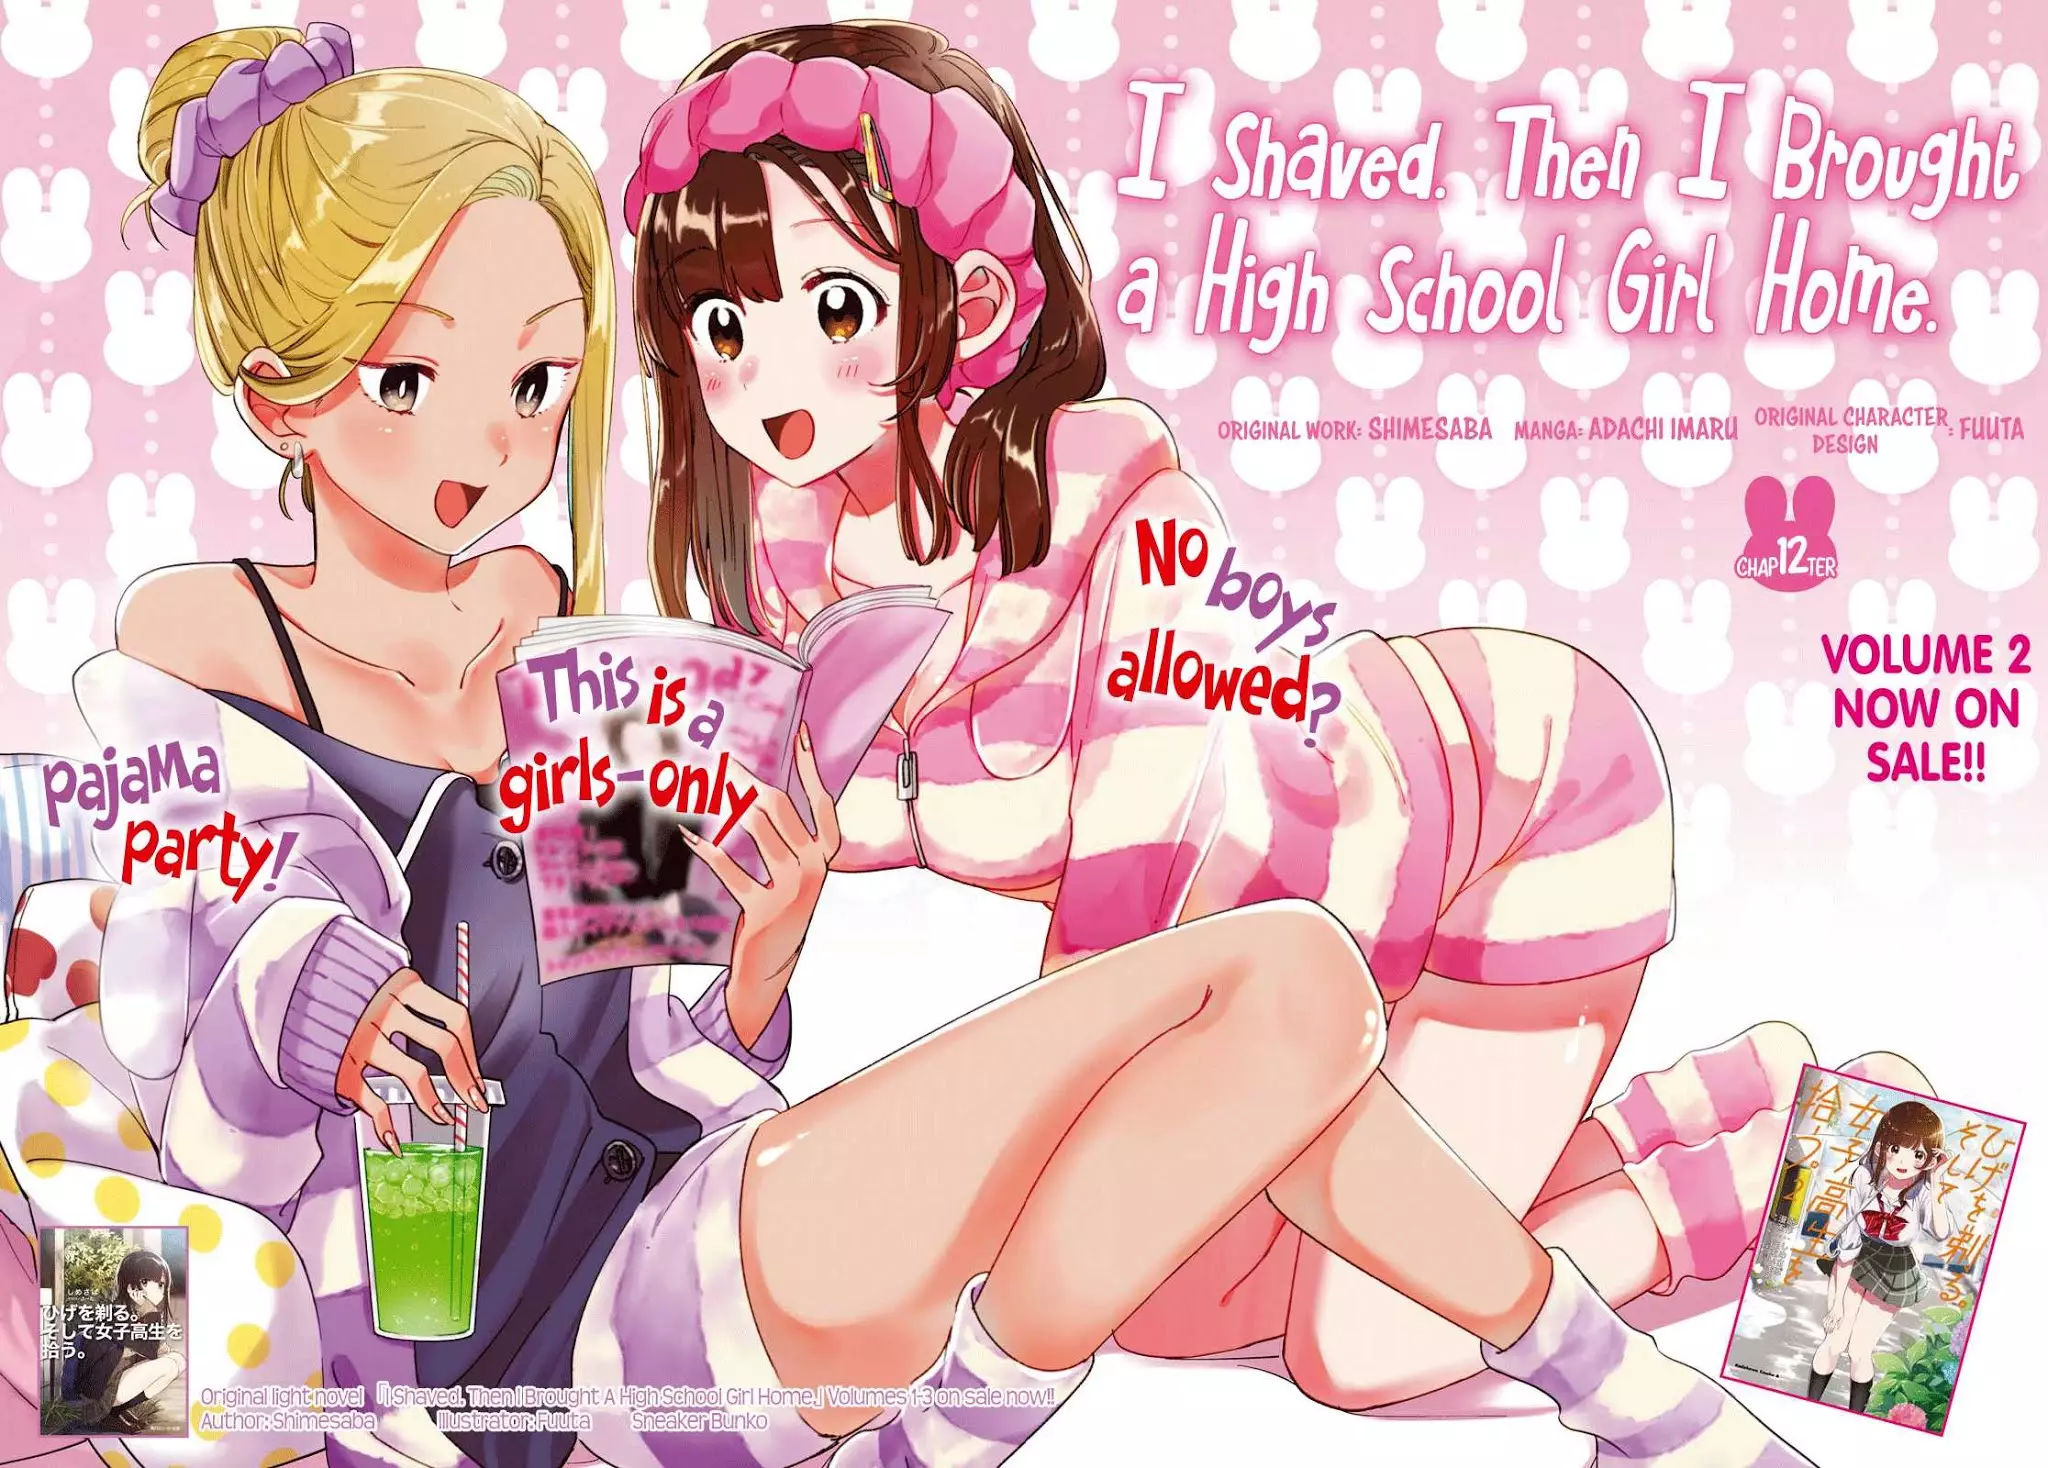 I Shaved. Then I Brought a High School Girl Home. - 12 page 3